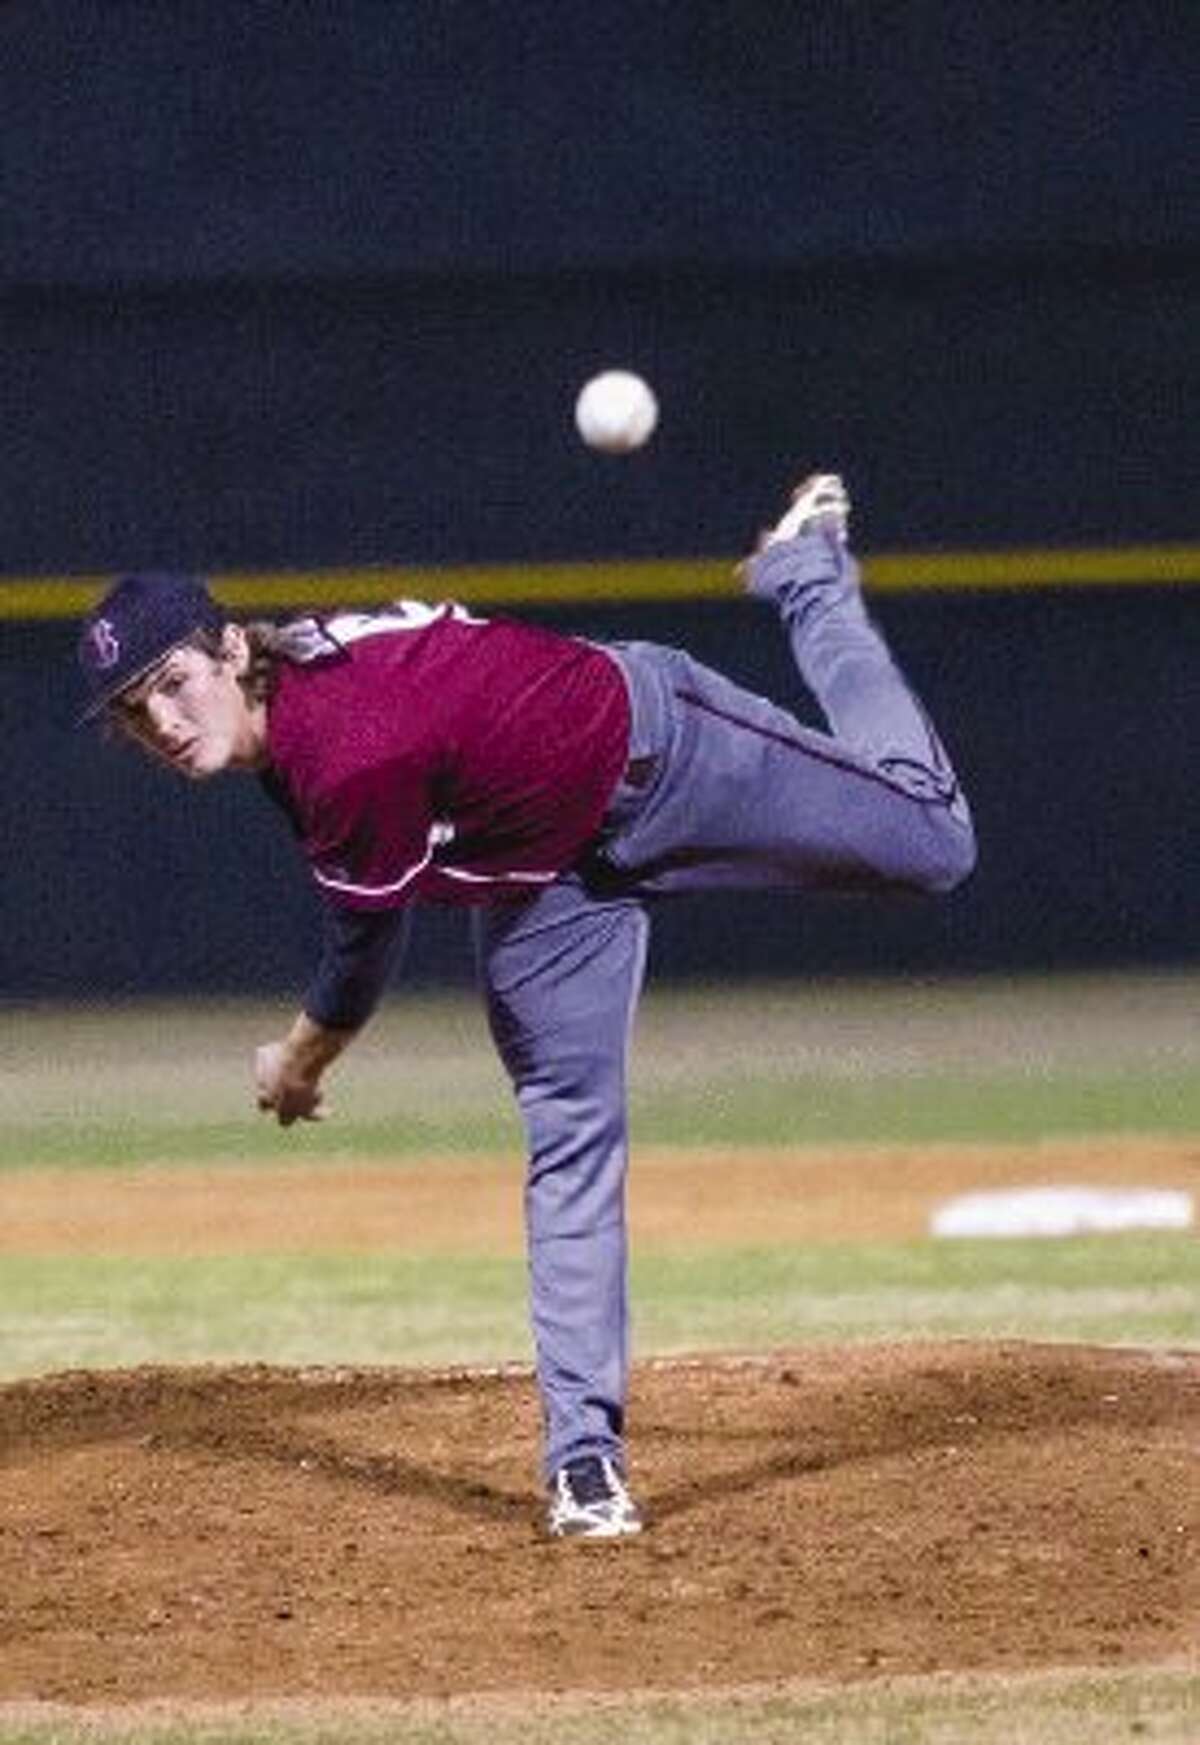 Magnolia’s Mason Schuh pitches during a District 18-4A game against Magnolia West on Friday. The Mustangs won 9-3. To view or purchase this photo and others like it, visit HCNpics.com.